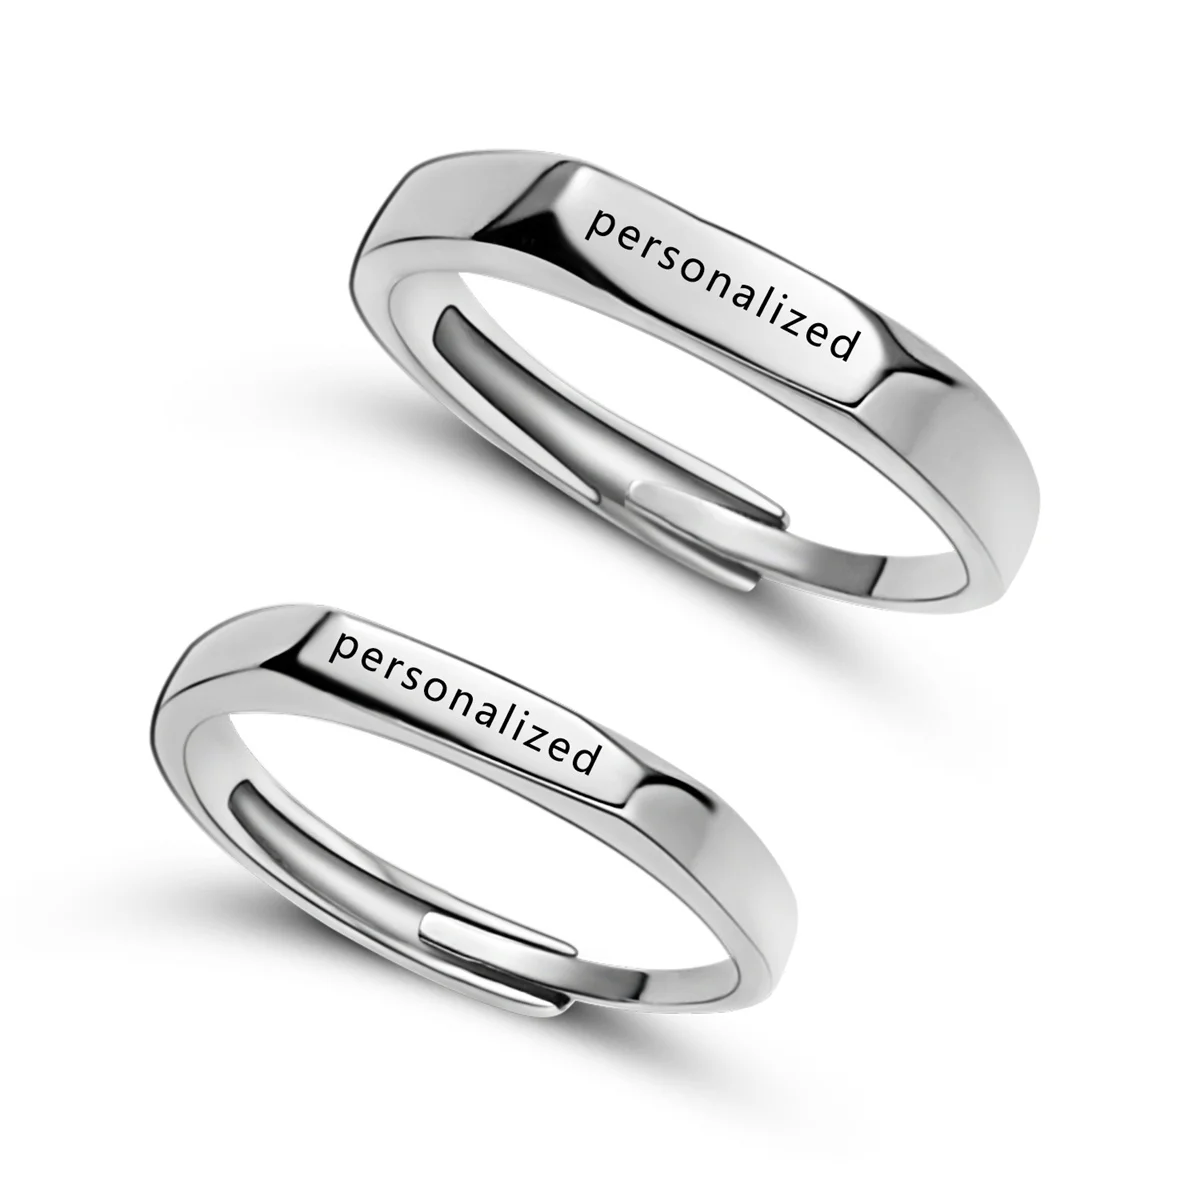 Personalized Custom Name Text Couple Rings For Women Men Stainless Steel Engraved Date Opening Ring Anniversary Gifts Jewelry custom made baby birth state keychain gift for new first father mother day gift baby name date weight time height key rings